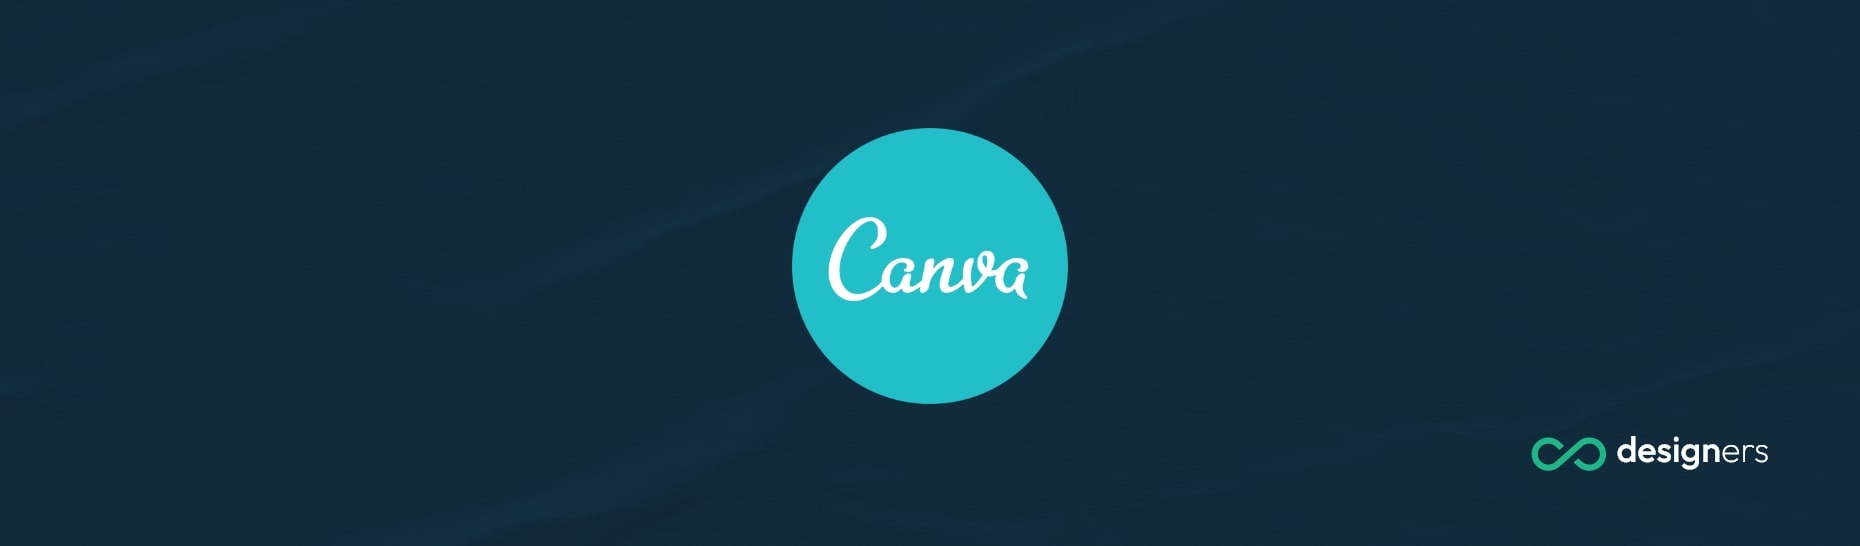 Can I Use Canva Images on Etsy? 